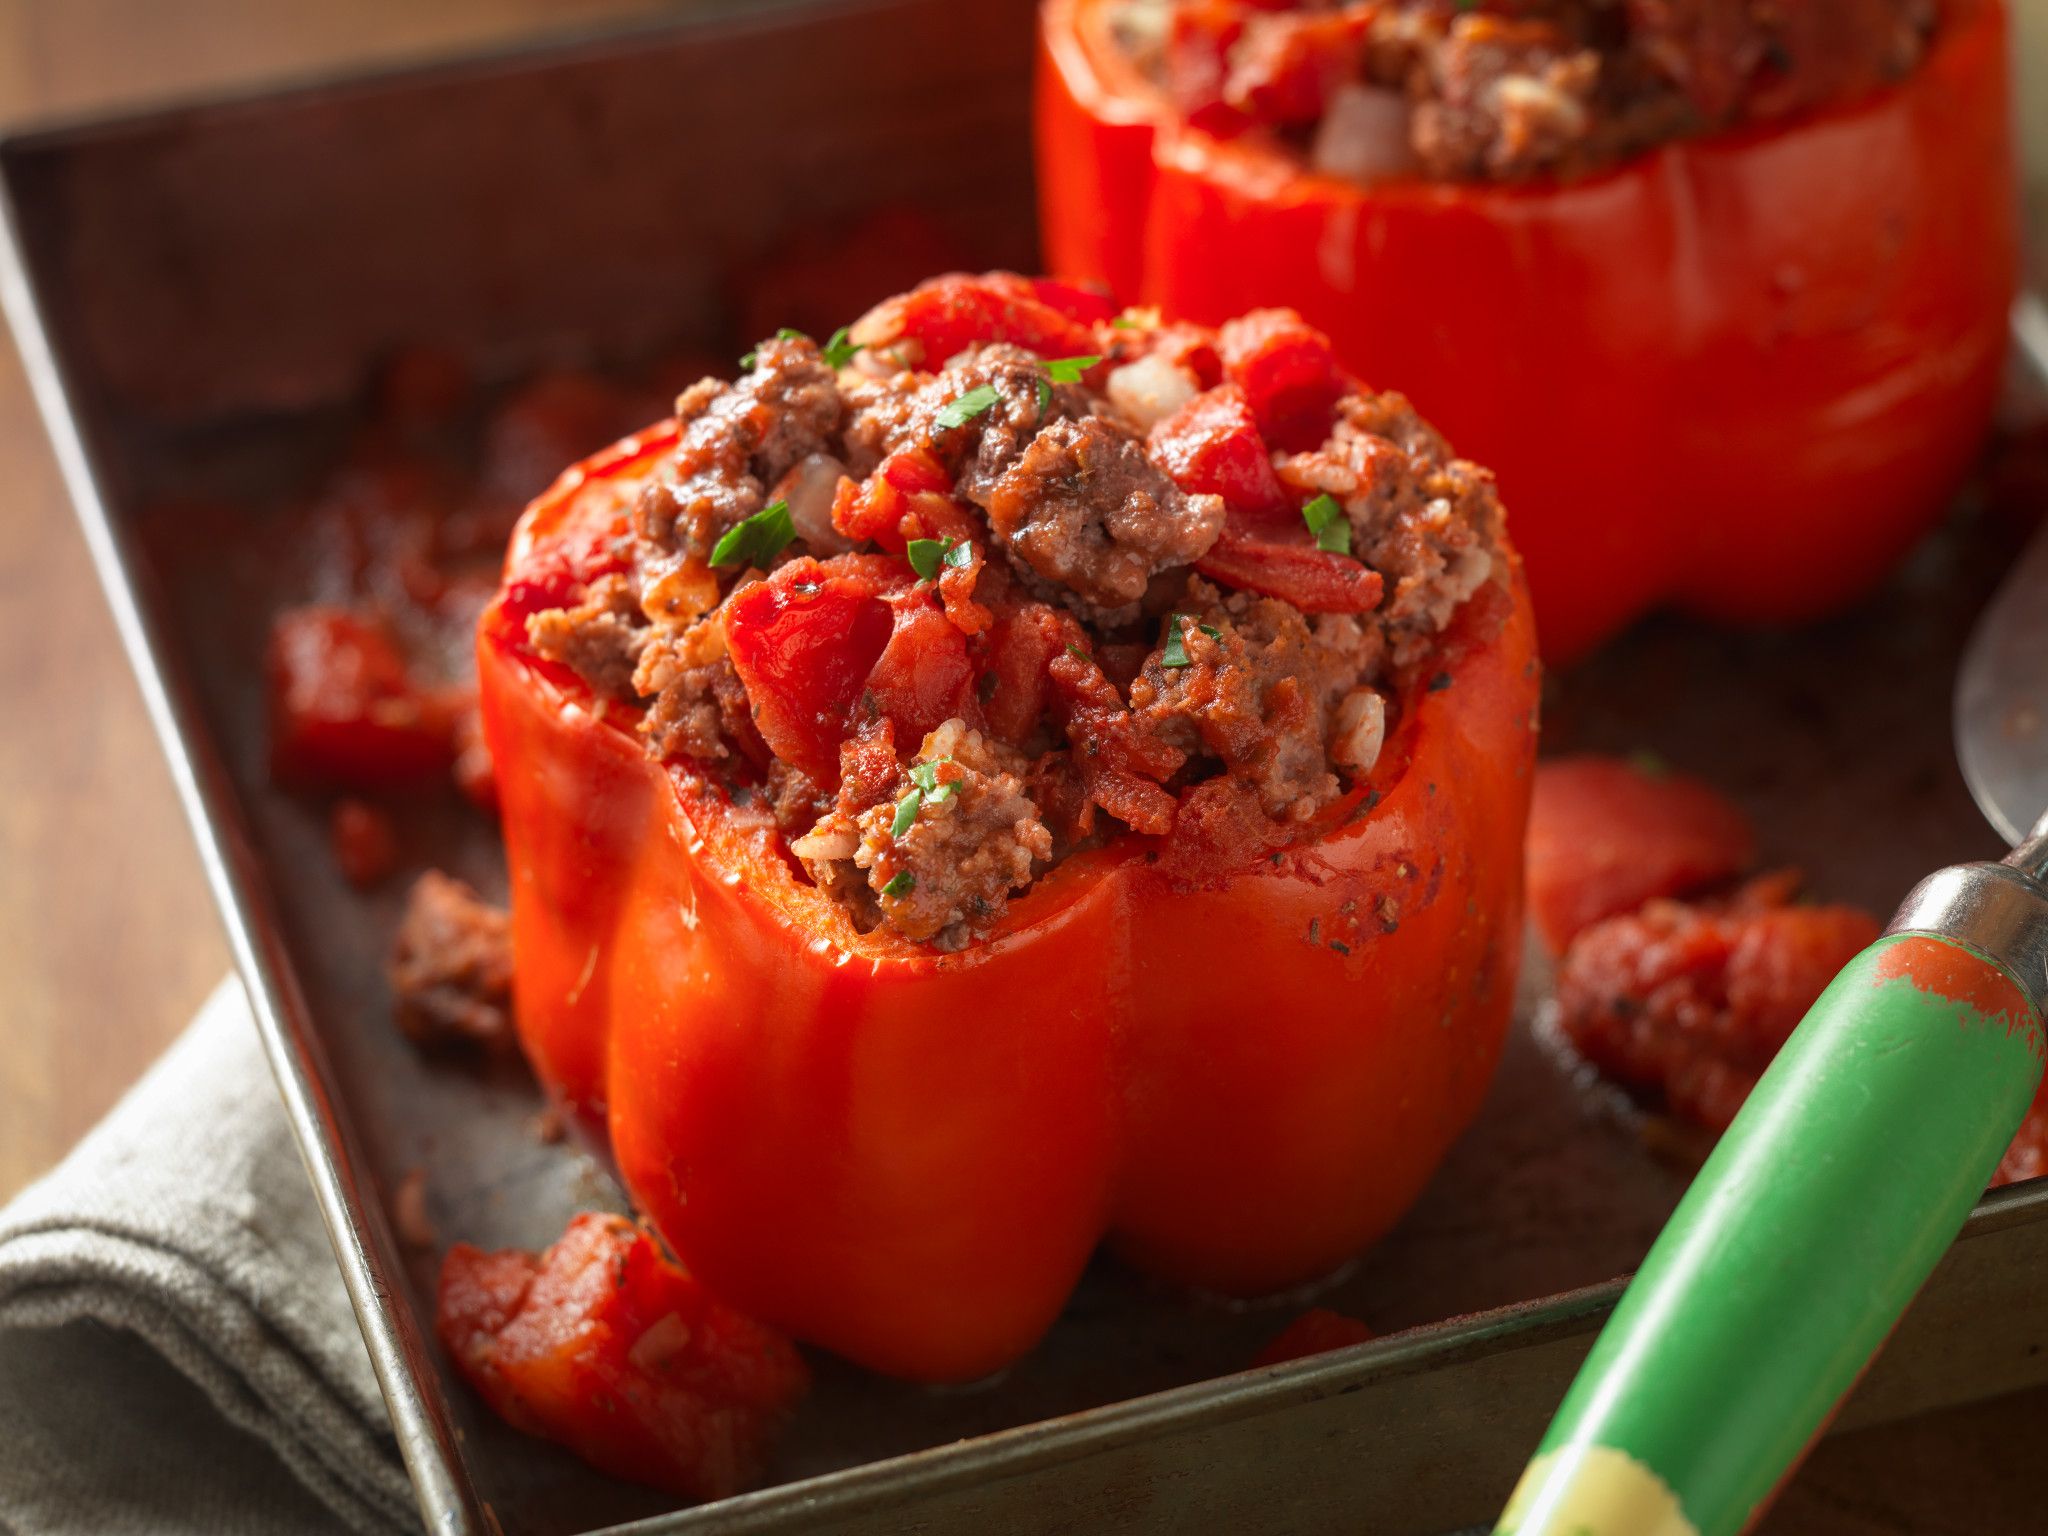 Vegan Stuffed Bell Peppers Clearance Cheapest, Save 70% | jlcatj.gob.mx